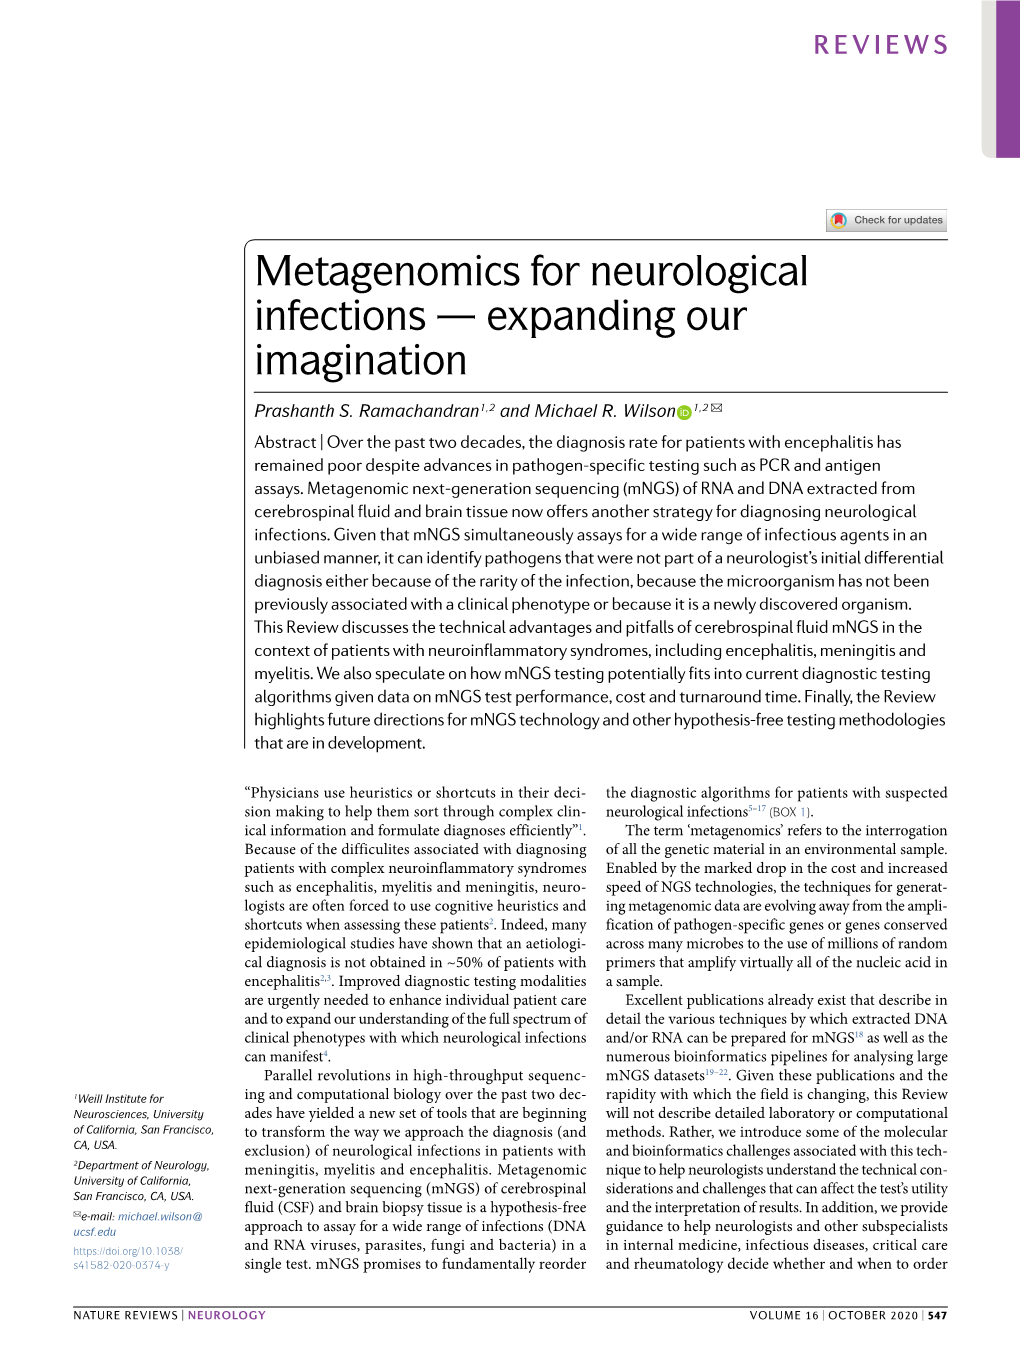 Metagenomics for Neurological Infections — Expanding Our Imagination